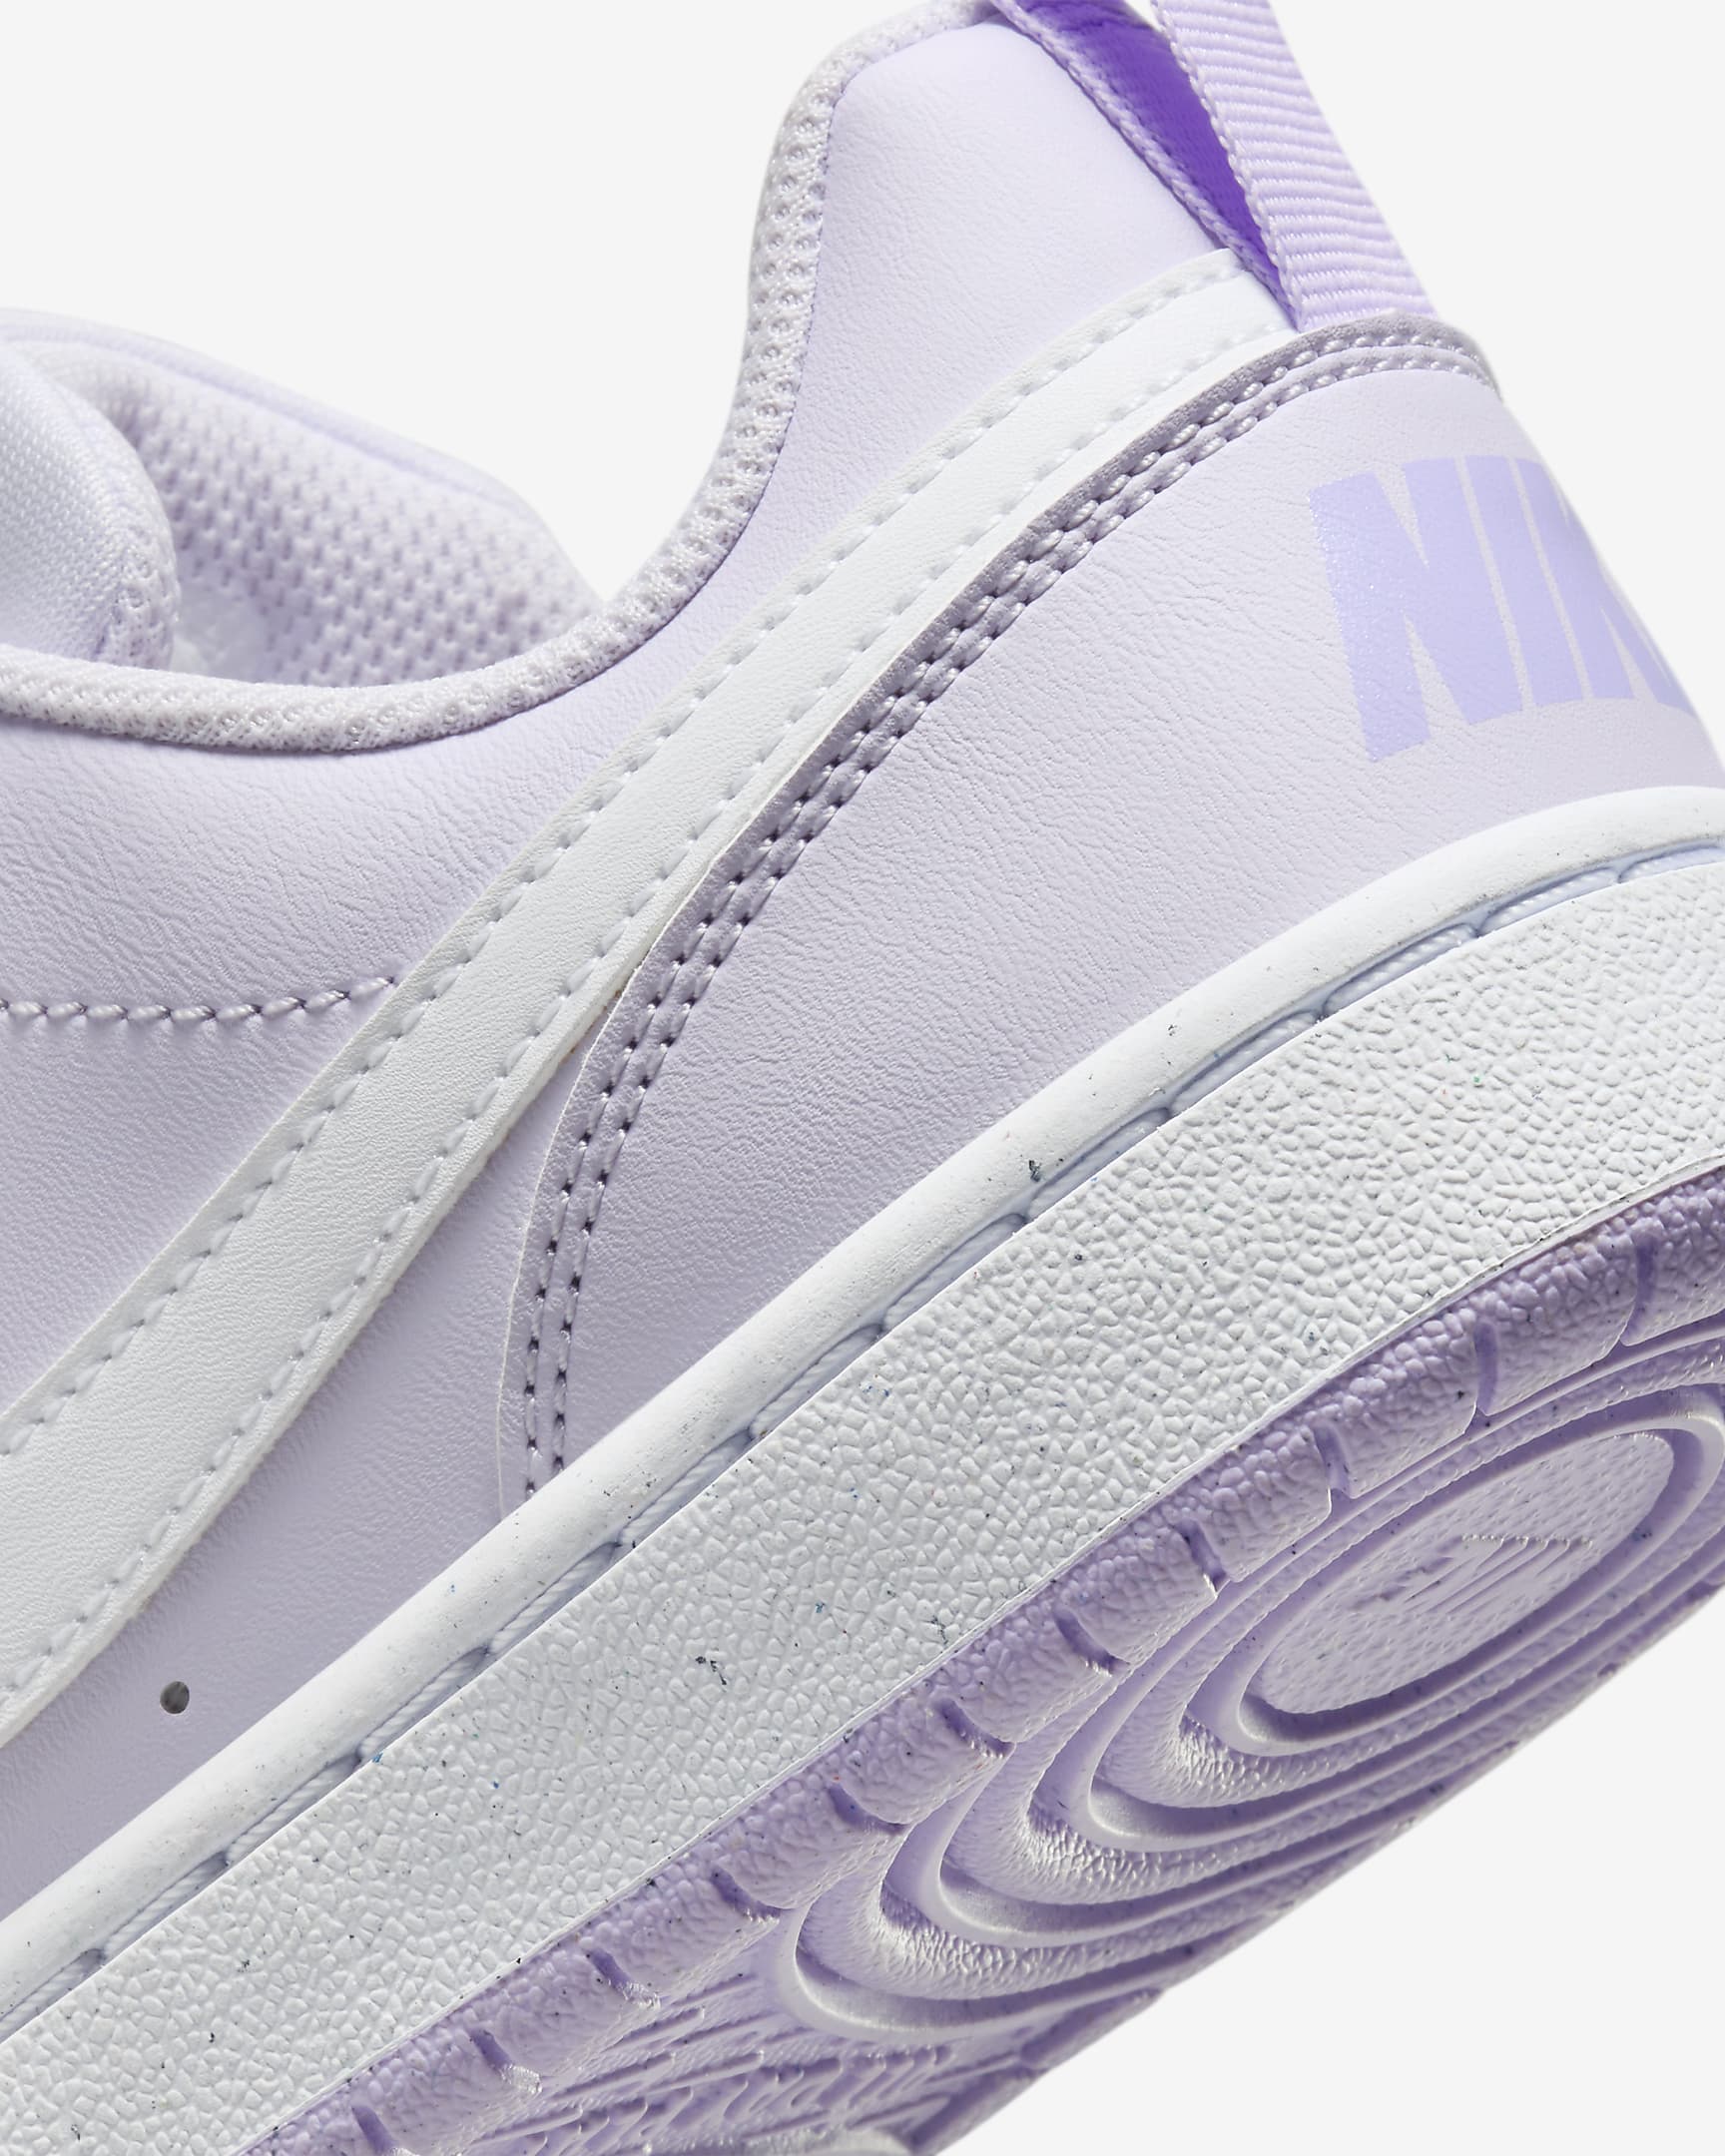 Nike Court Borough Low Recraft Big Kids' Shoes - Barely Grape/Lilac Bloom/White